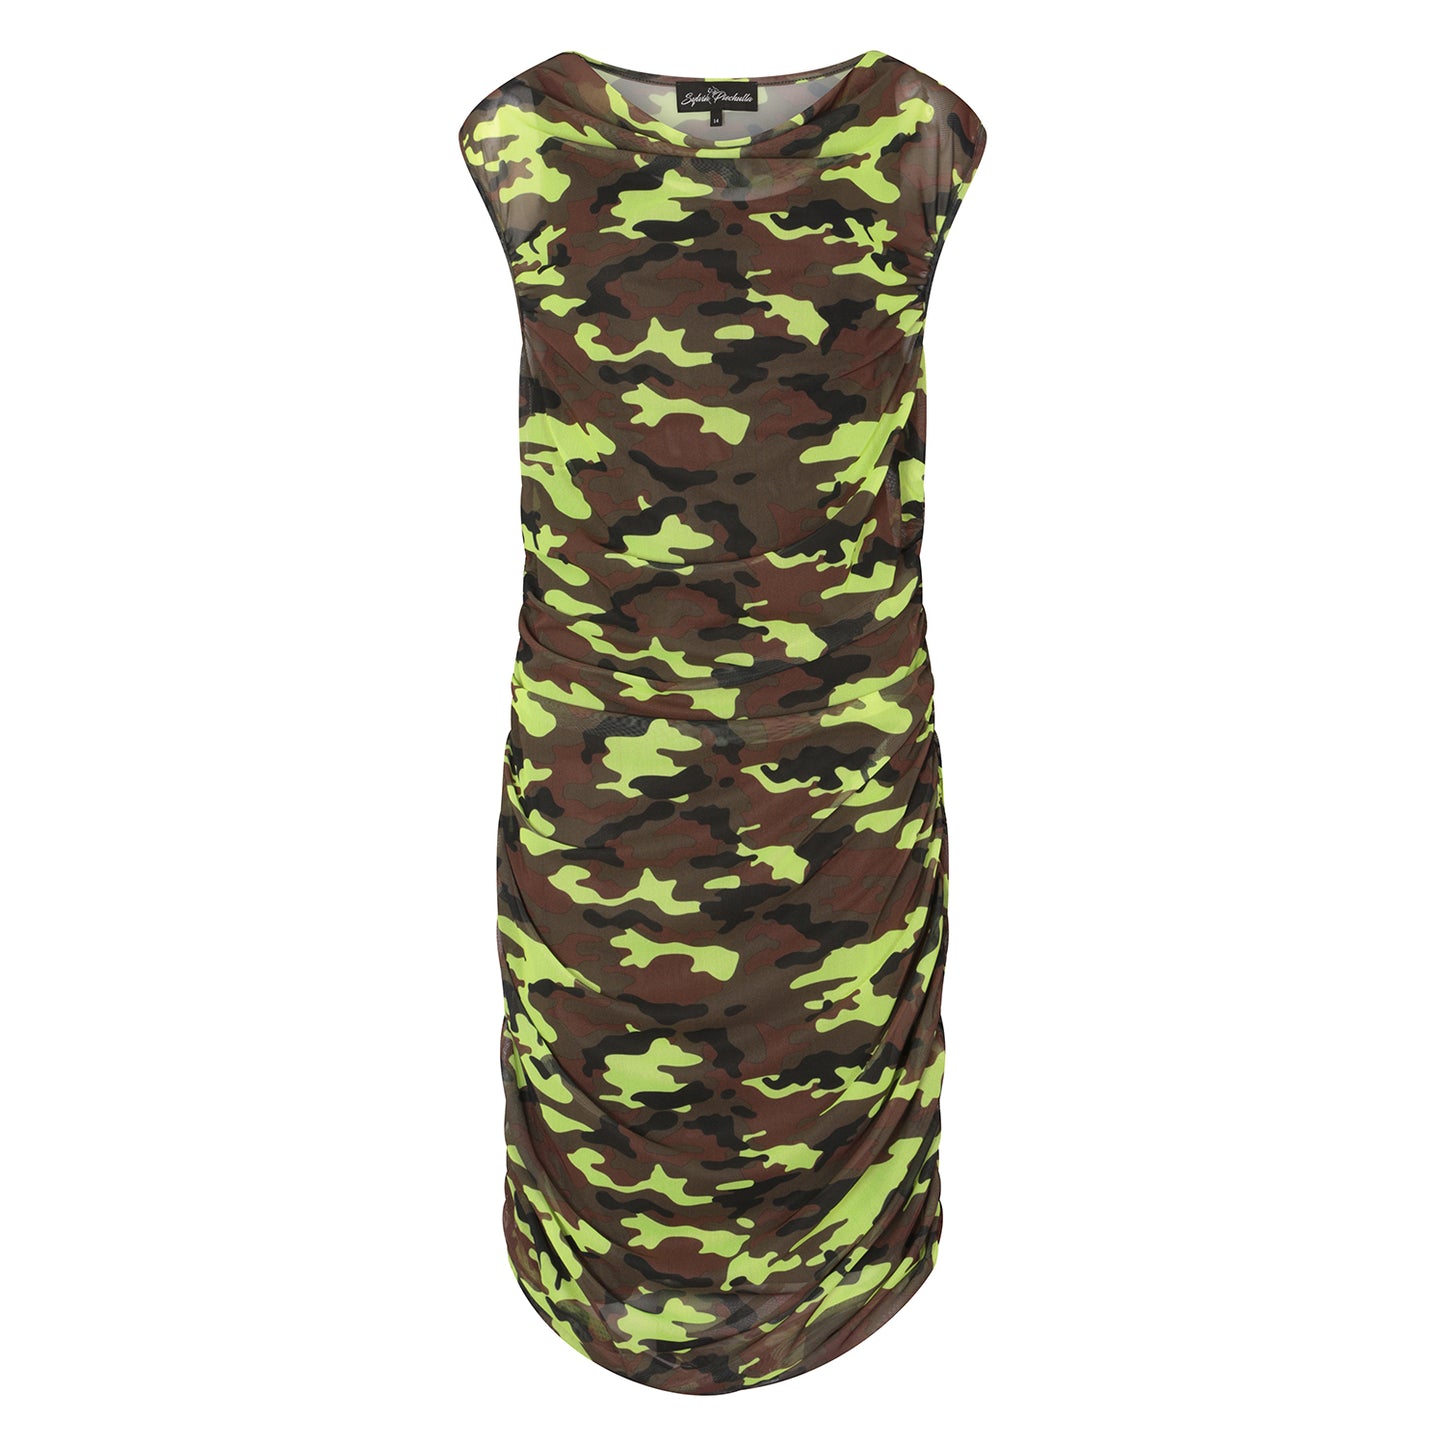 Women's Summer Plus Size and Mid Size Neon Lime Black Brown Camouflage Bodycon Midi Dress displayed as a cutout on an invisible mannequin.